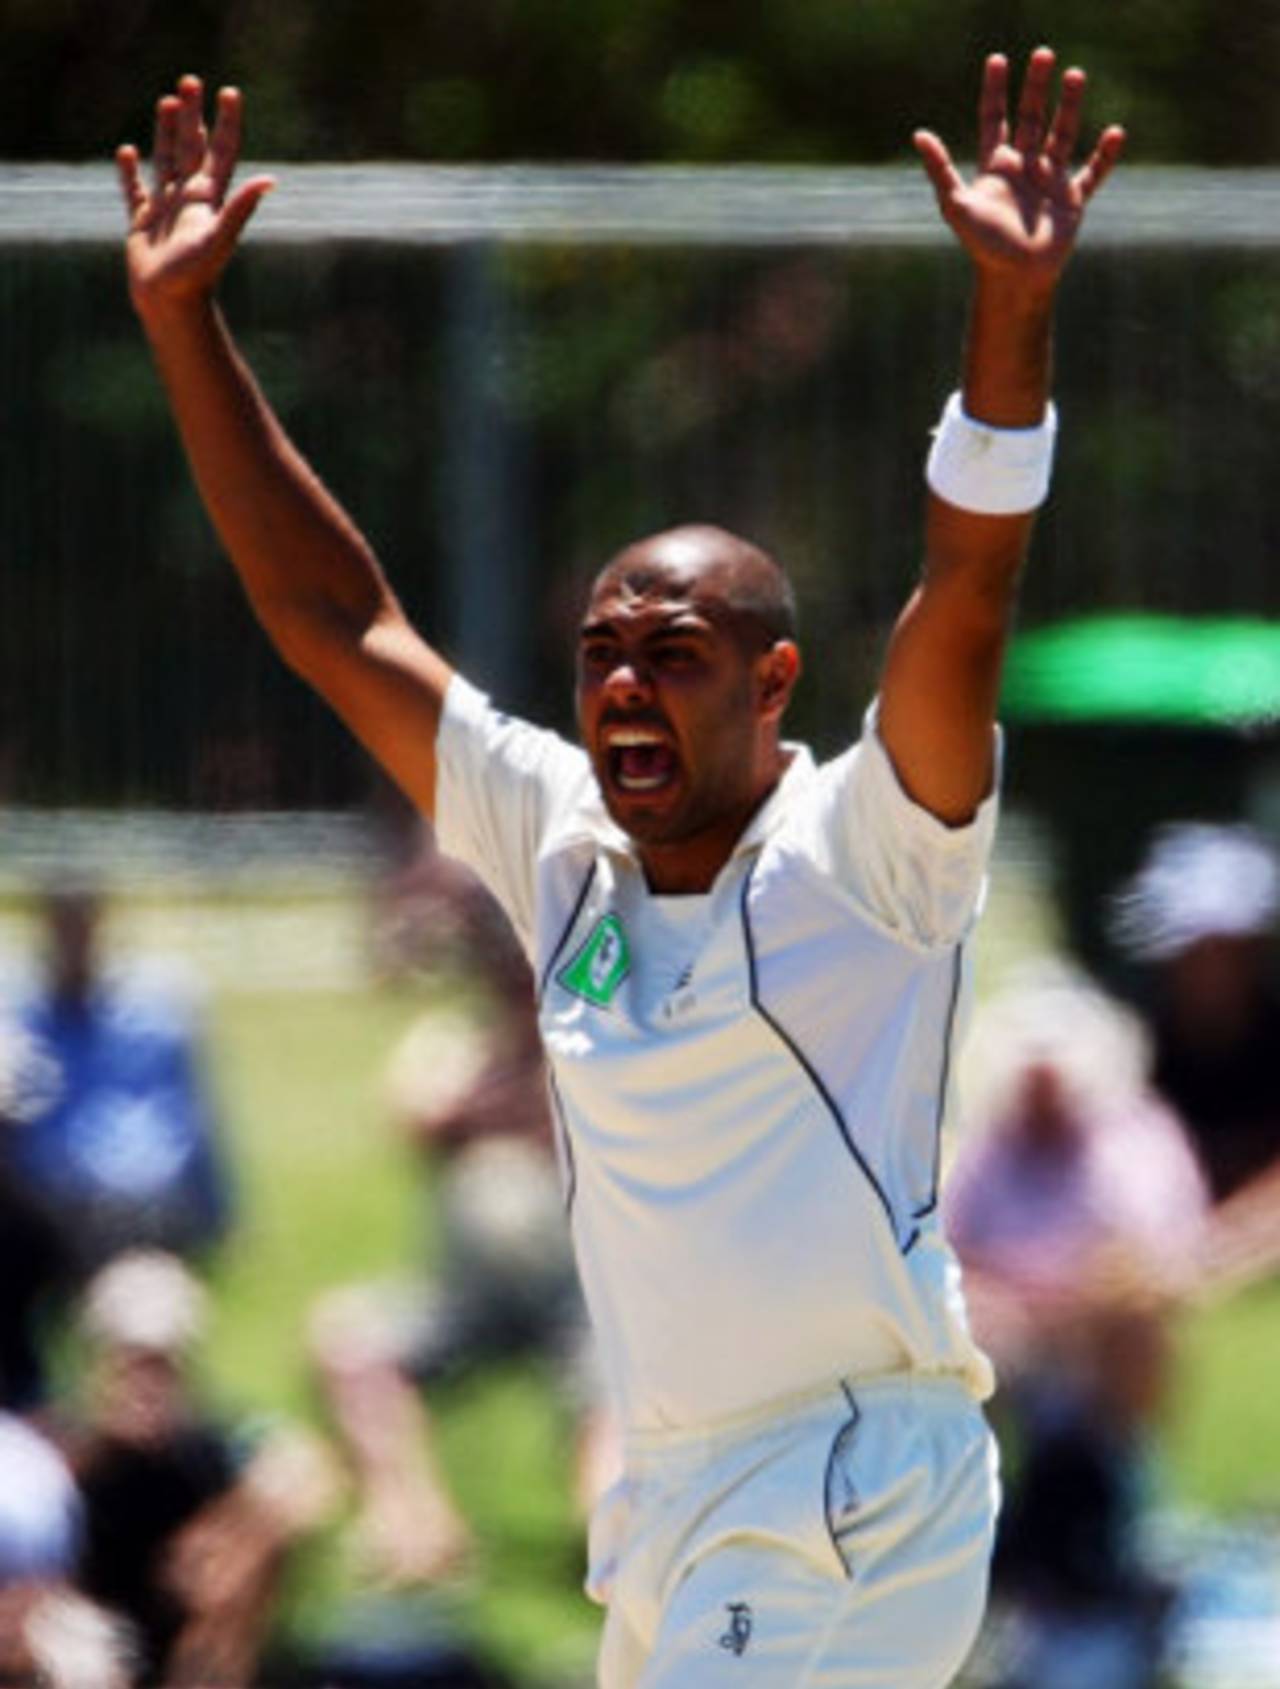 Jeetan Patel picked up two wickets in two balls, New Zealand v West Indies, 2nd Test, 4th day, December 22, 2008